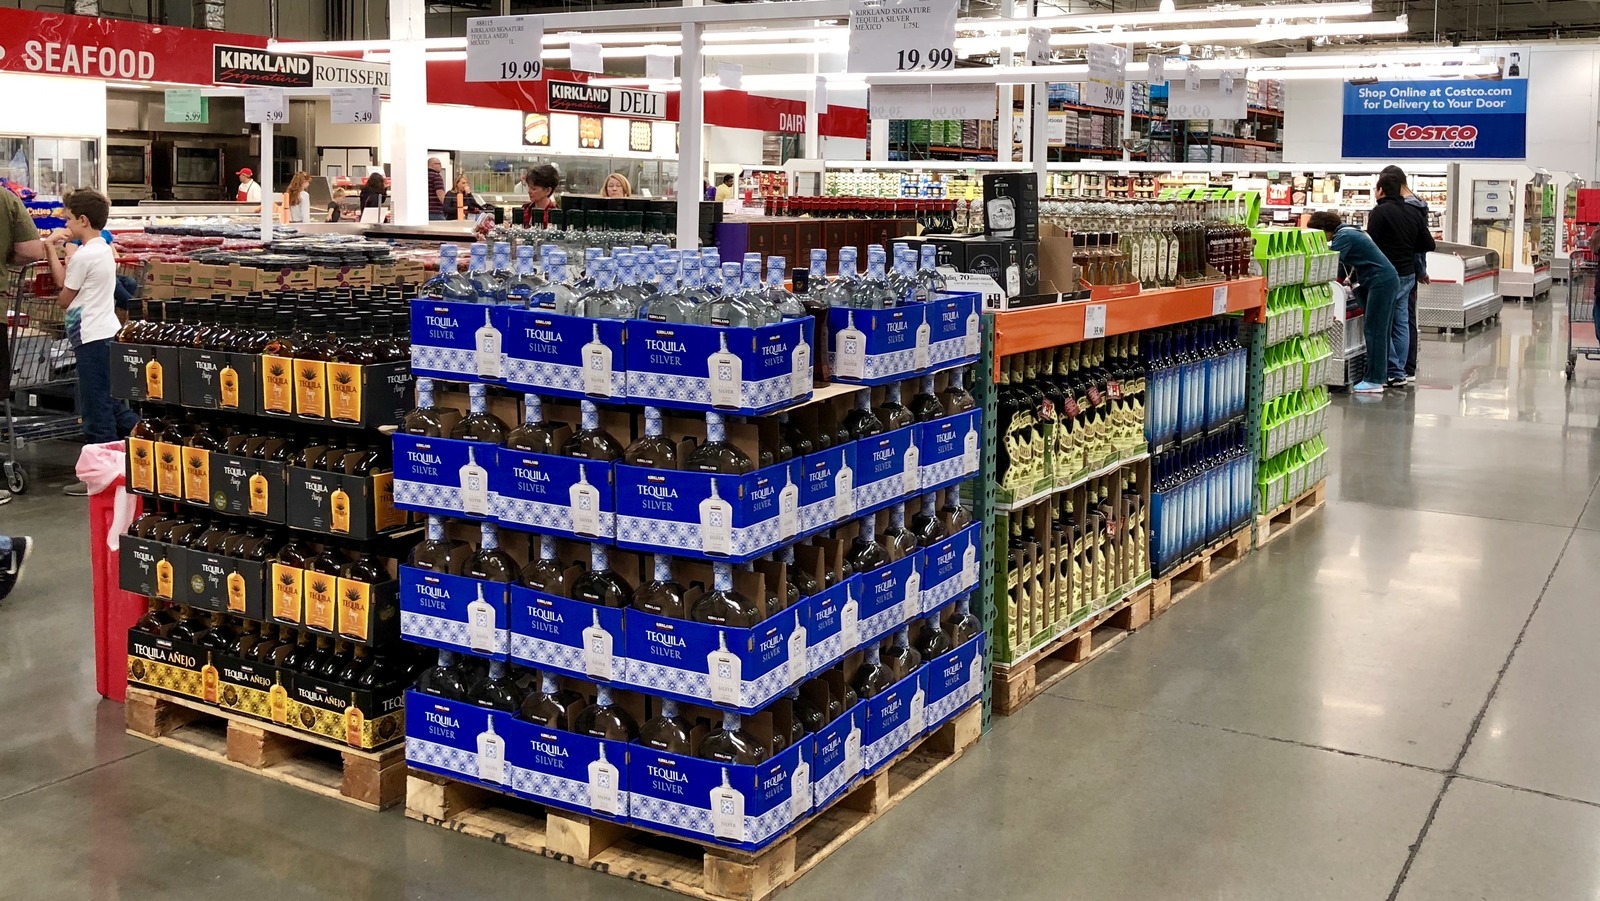 Does Costco sell distilled water? Can I buy a Costco Water Distiller?